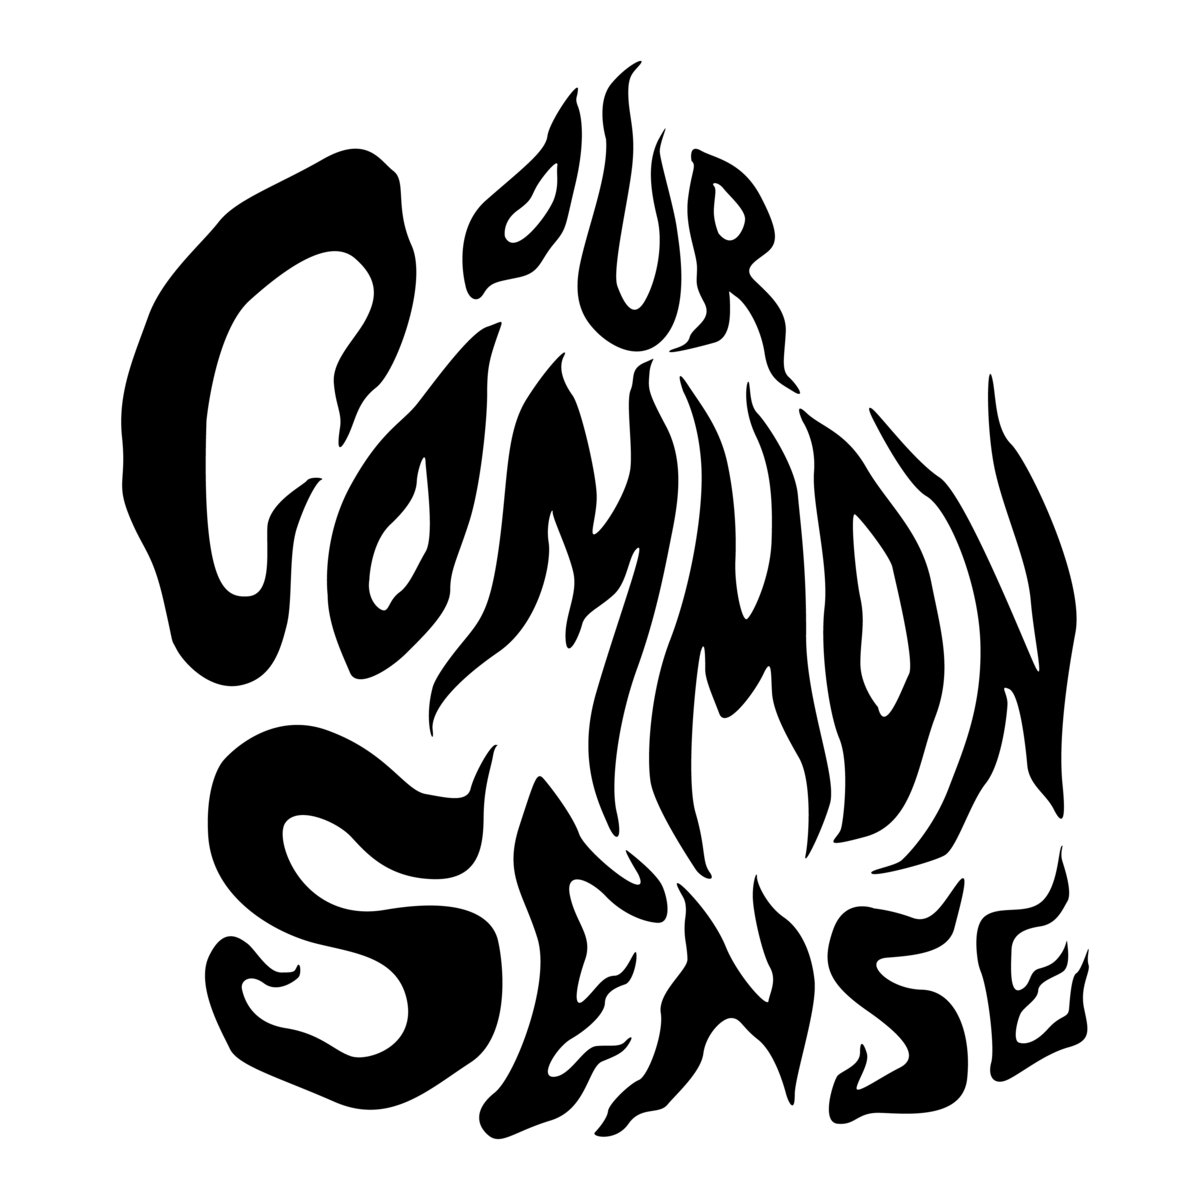 OUR COMMON SENSE - Hammer Of Witches cover 